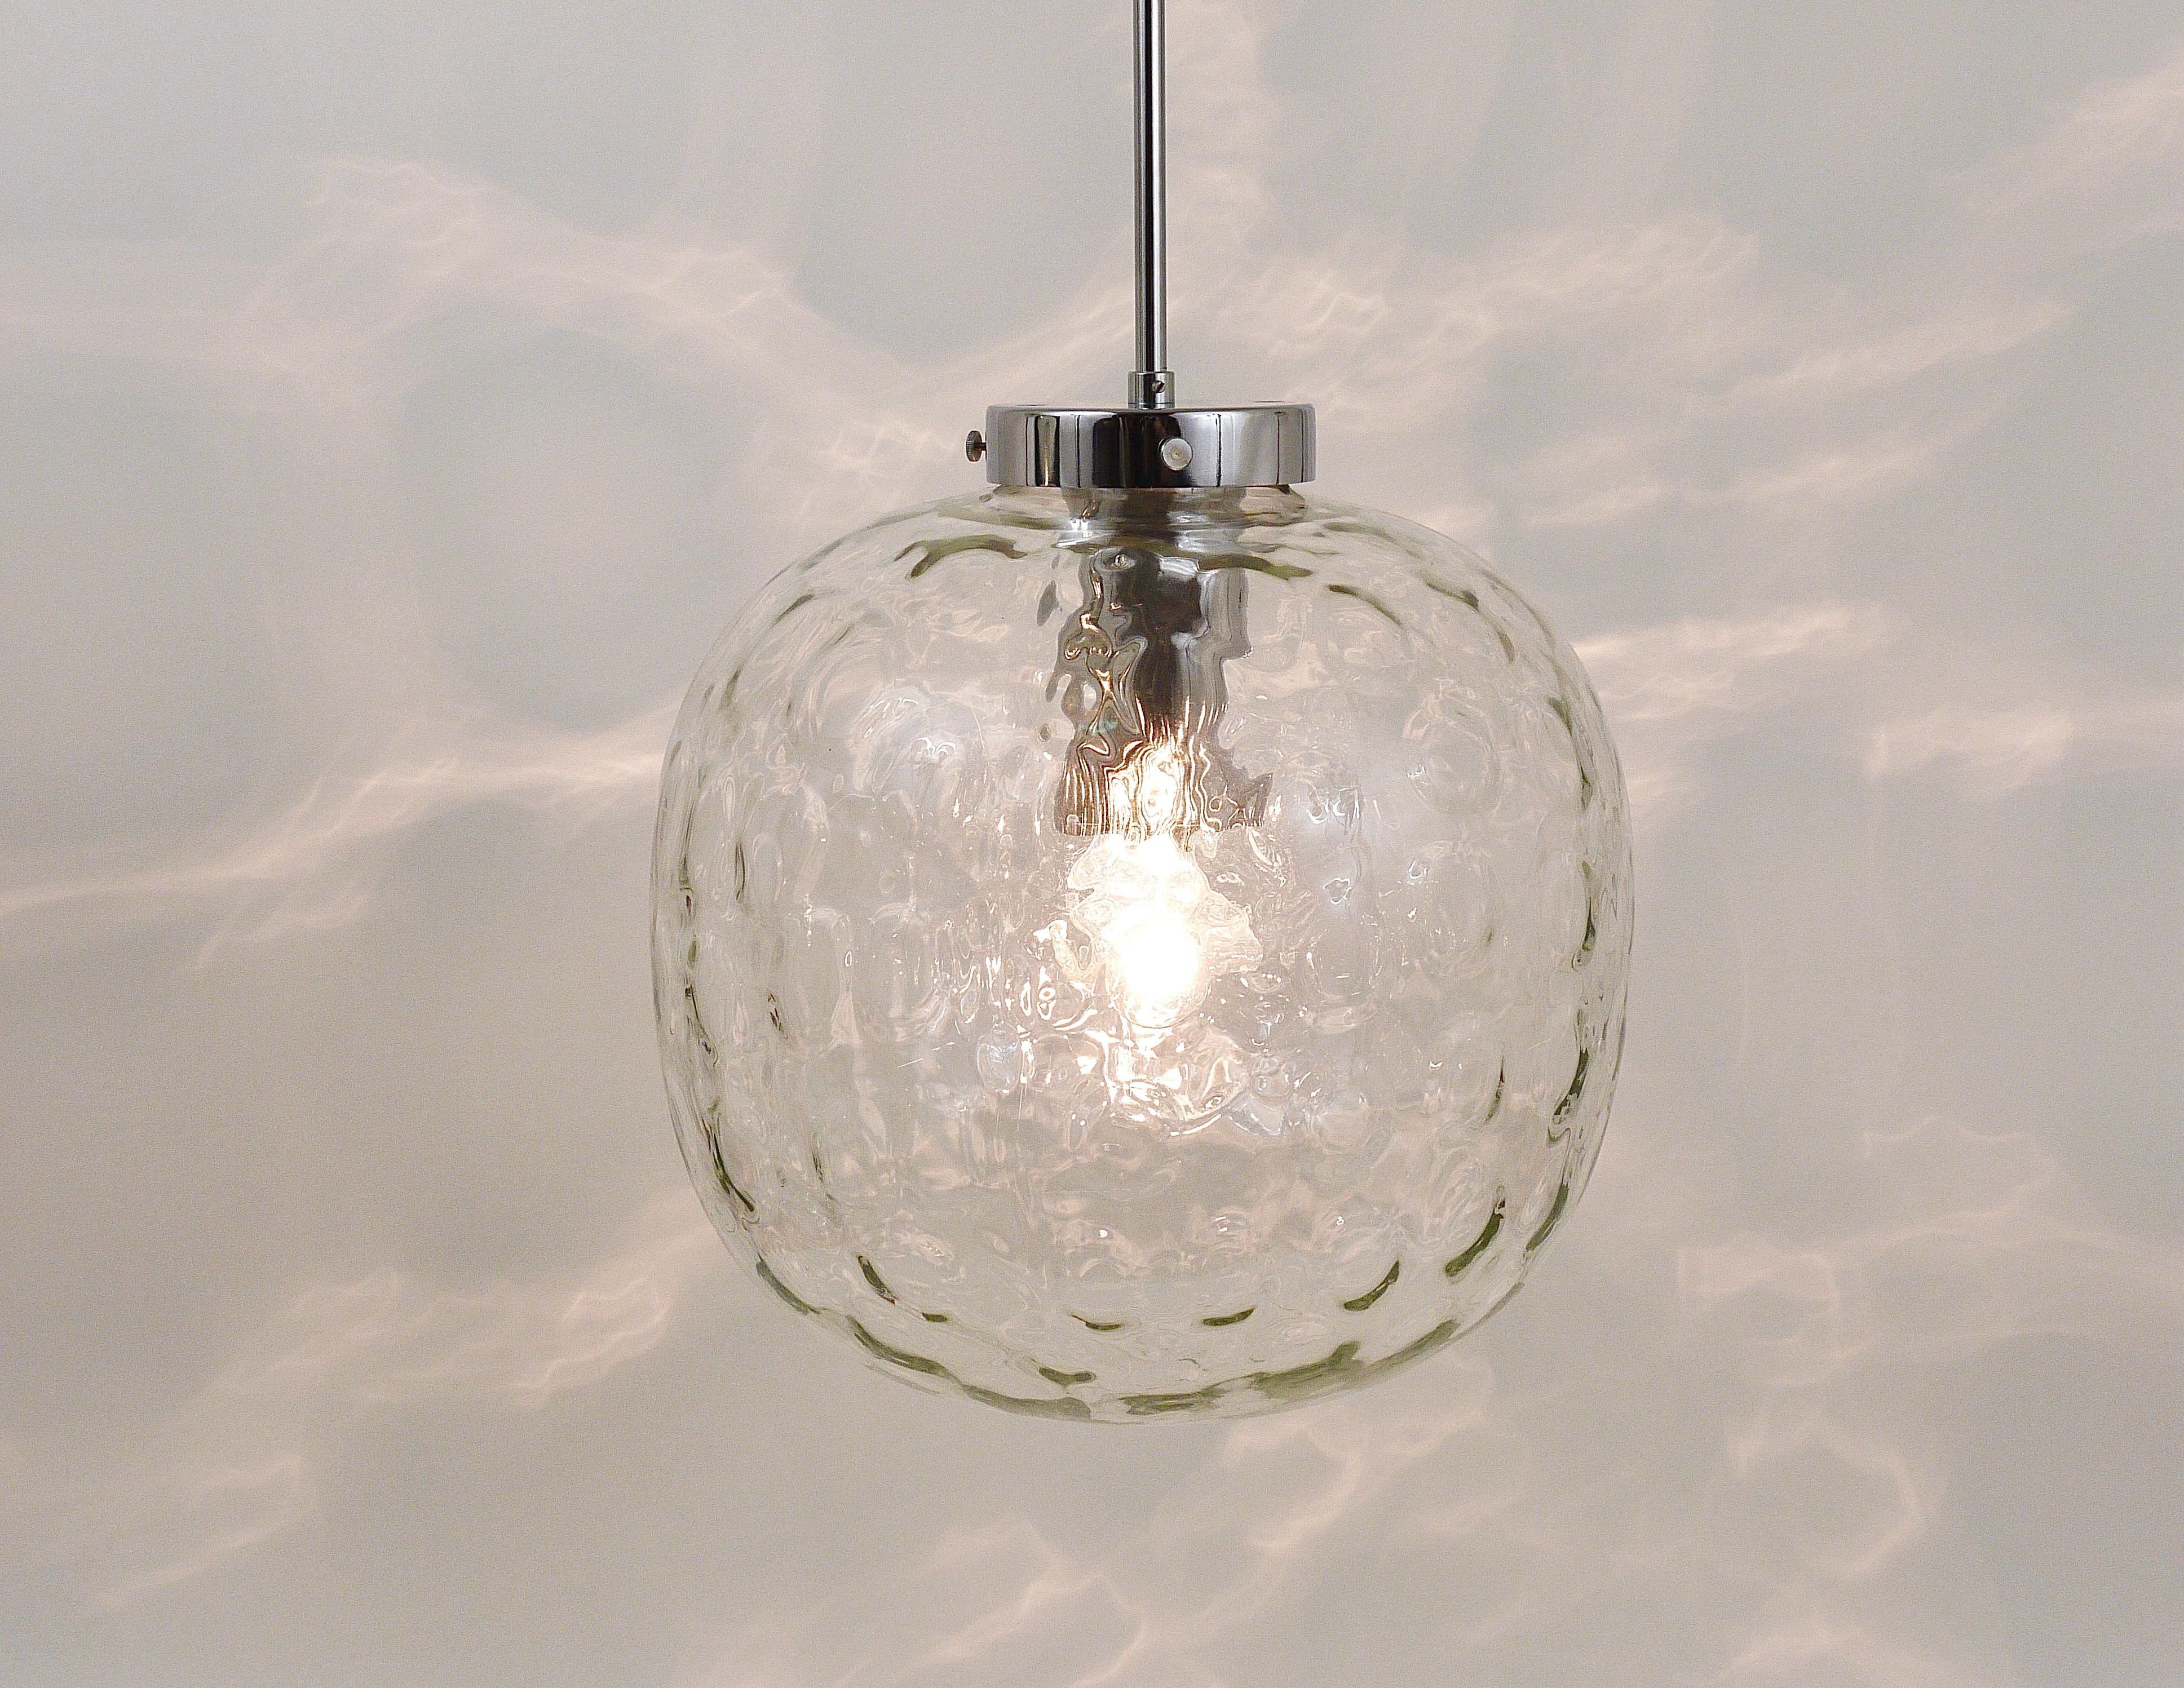 A beautiful Space Age pendant light with a large clear glass globe and chrome-plated hardware. The globe is hand blown and has lovely round melted dots in the glass, this lamp is giving a wonderful light. It has a diameter of 12 in. Executed in the